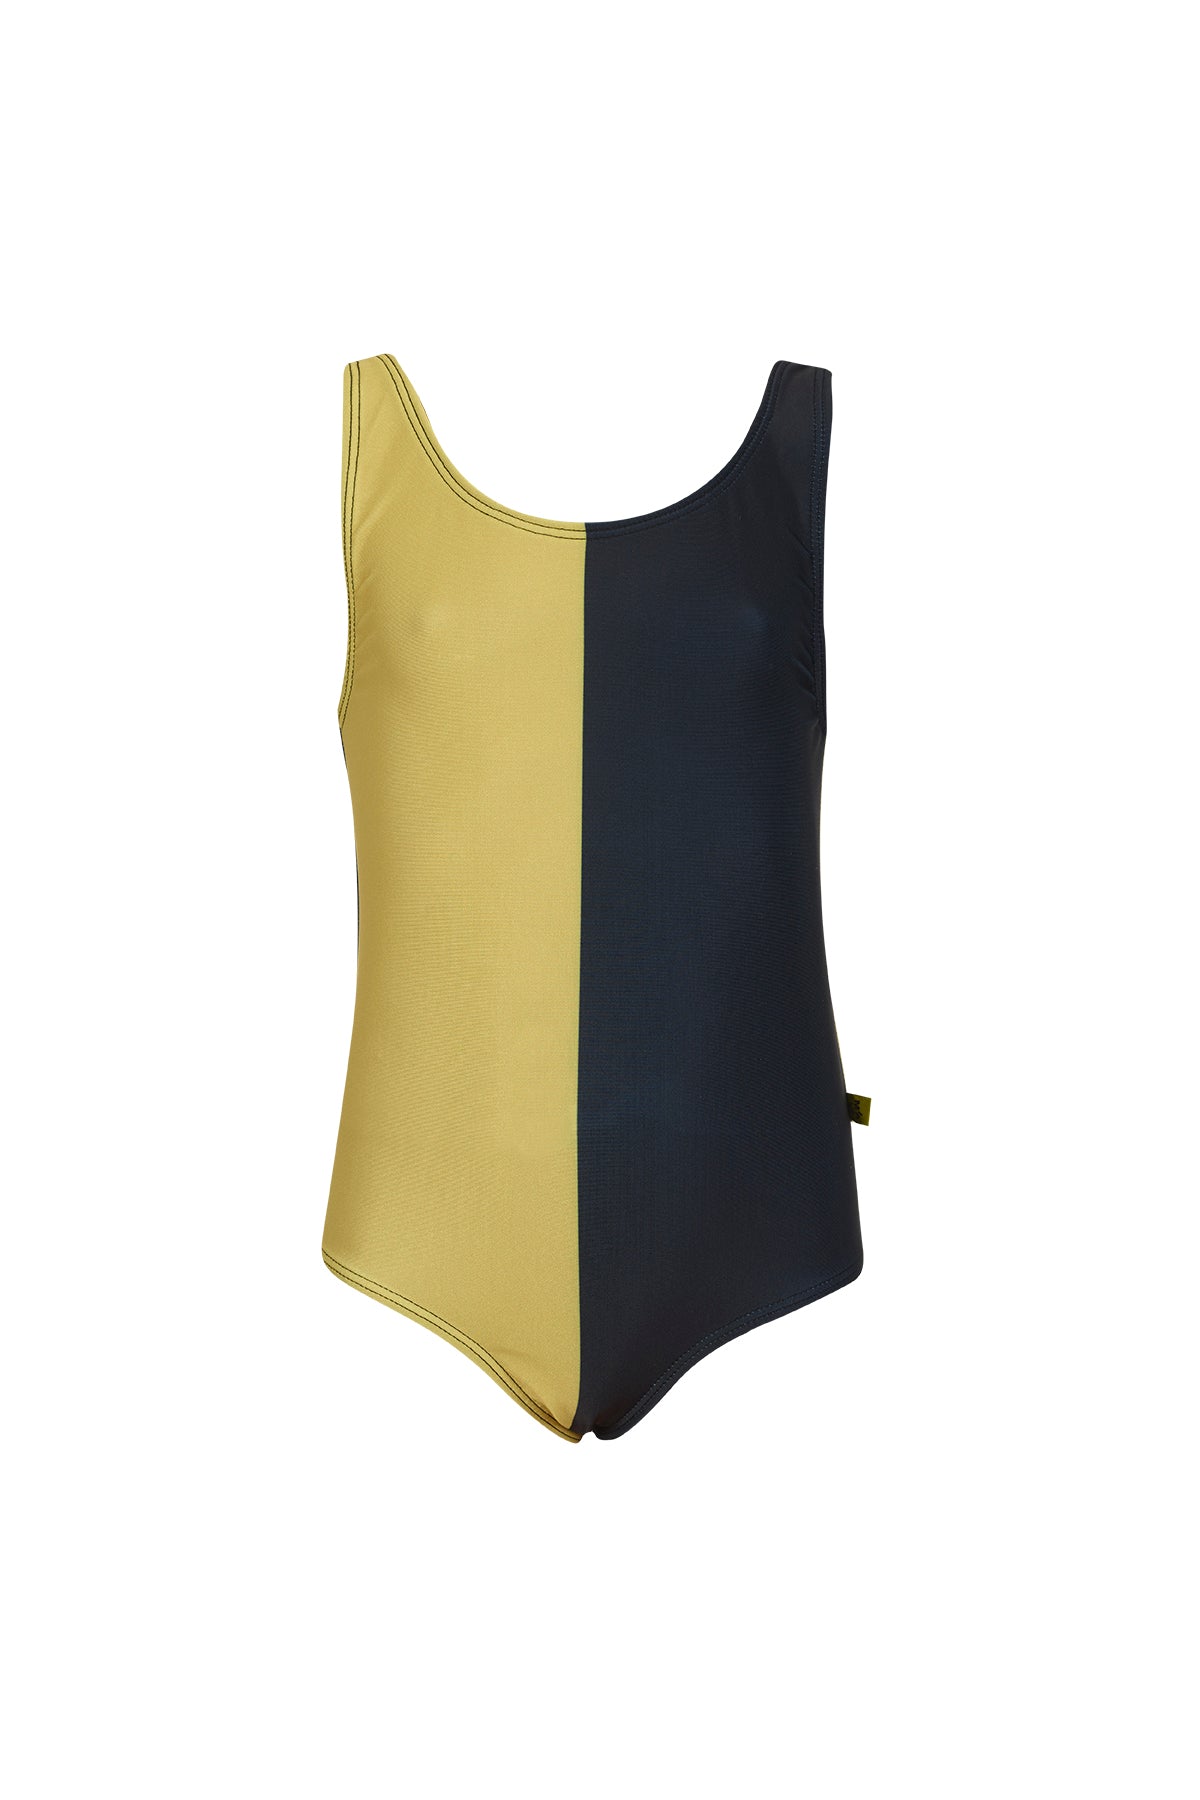 YELLOW AND BLACK SWIMSUIT makids